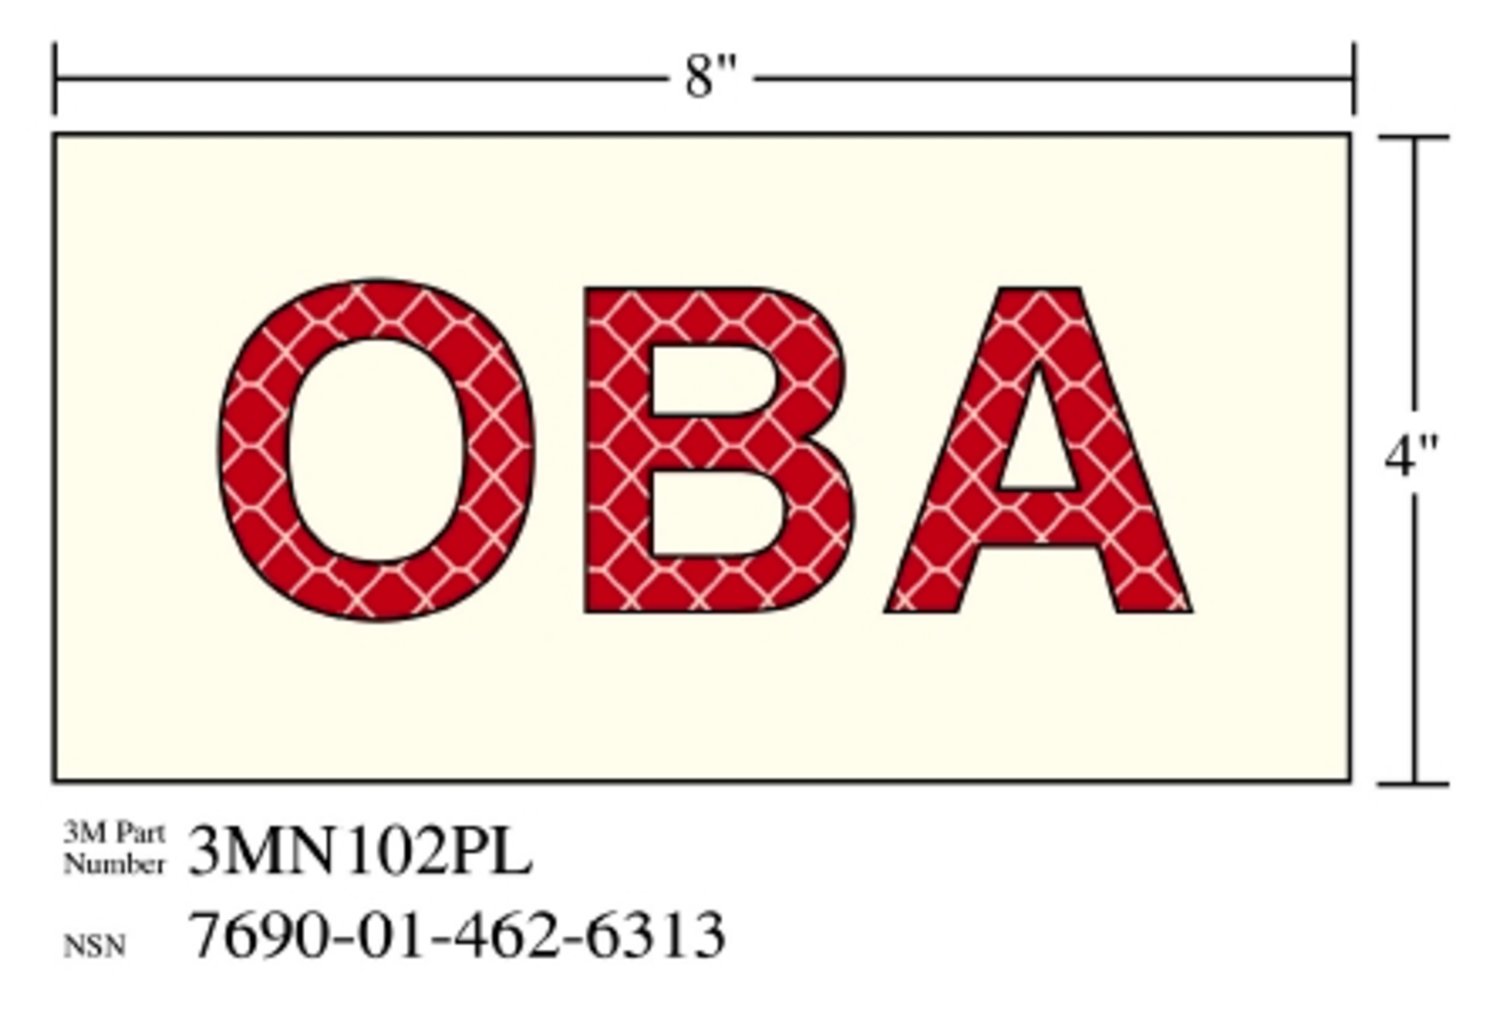 7010388689 - 3M Photoluminescent Film 6900, Shipboard Sign 3MN102PL, 8 in x 4 in,
"OBA", 10/Package